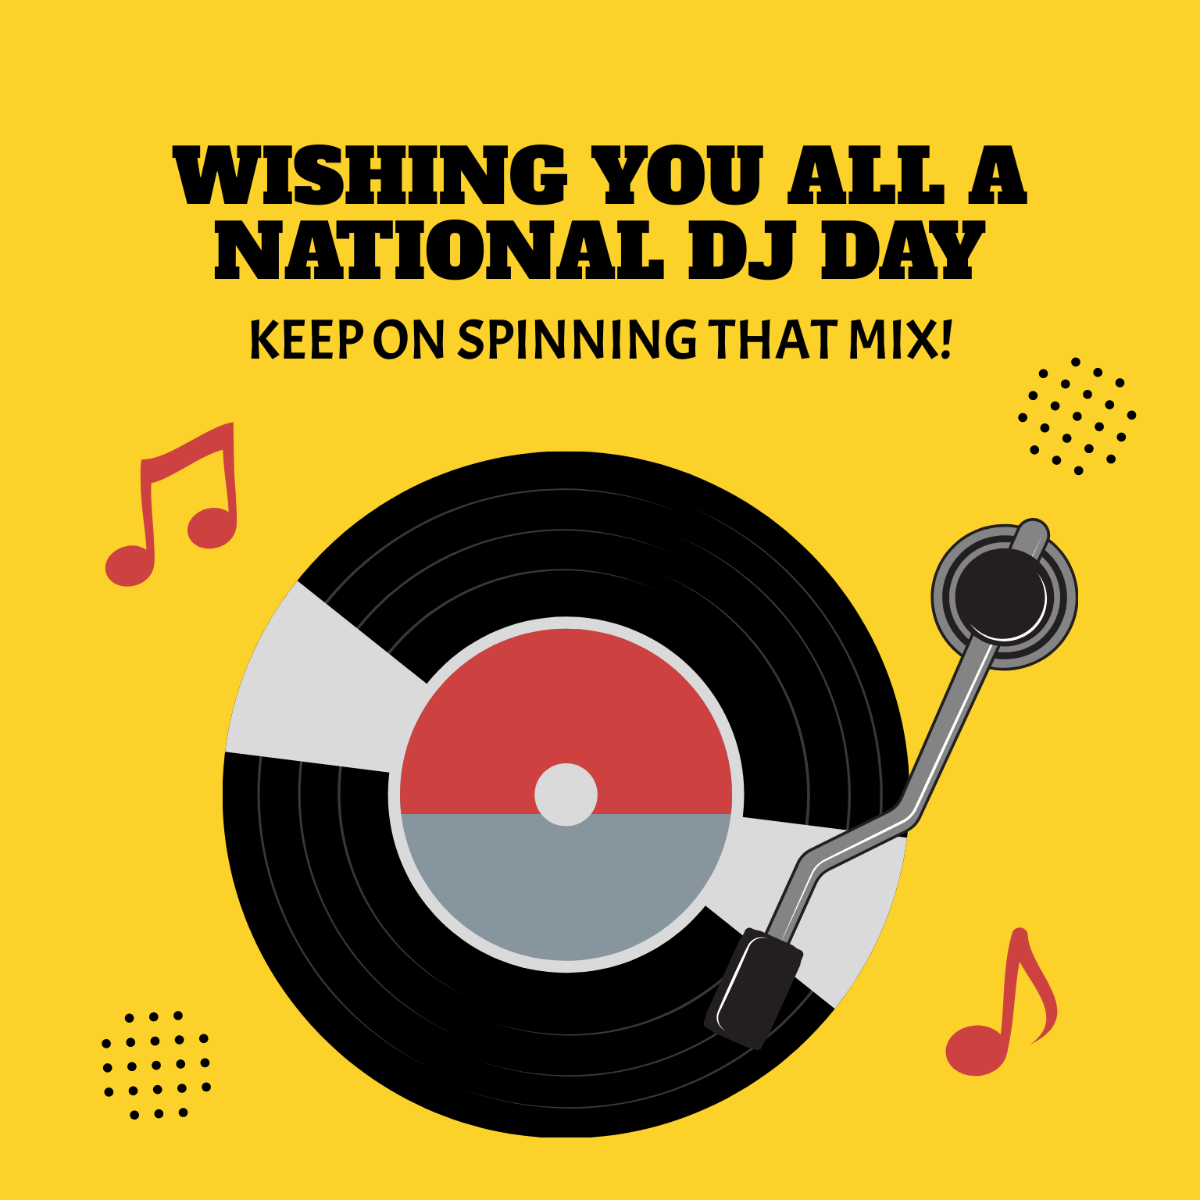 Free National DJ Day Wishes Vector Template